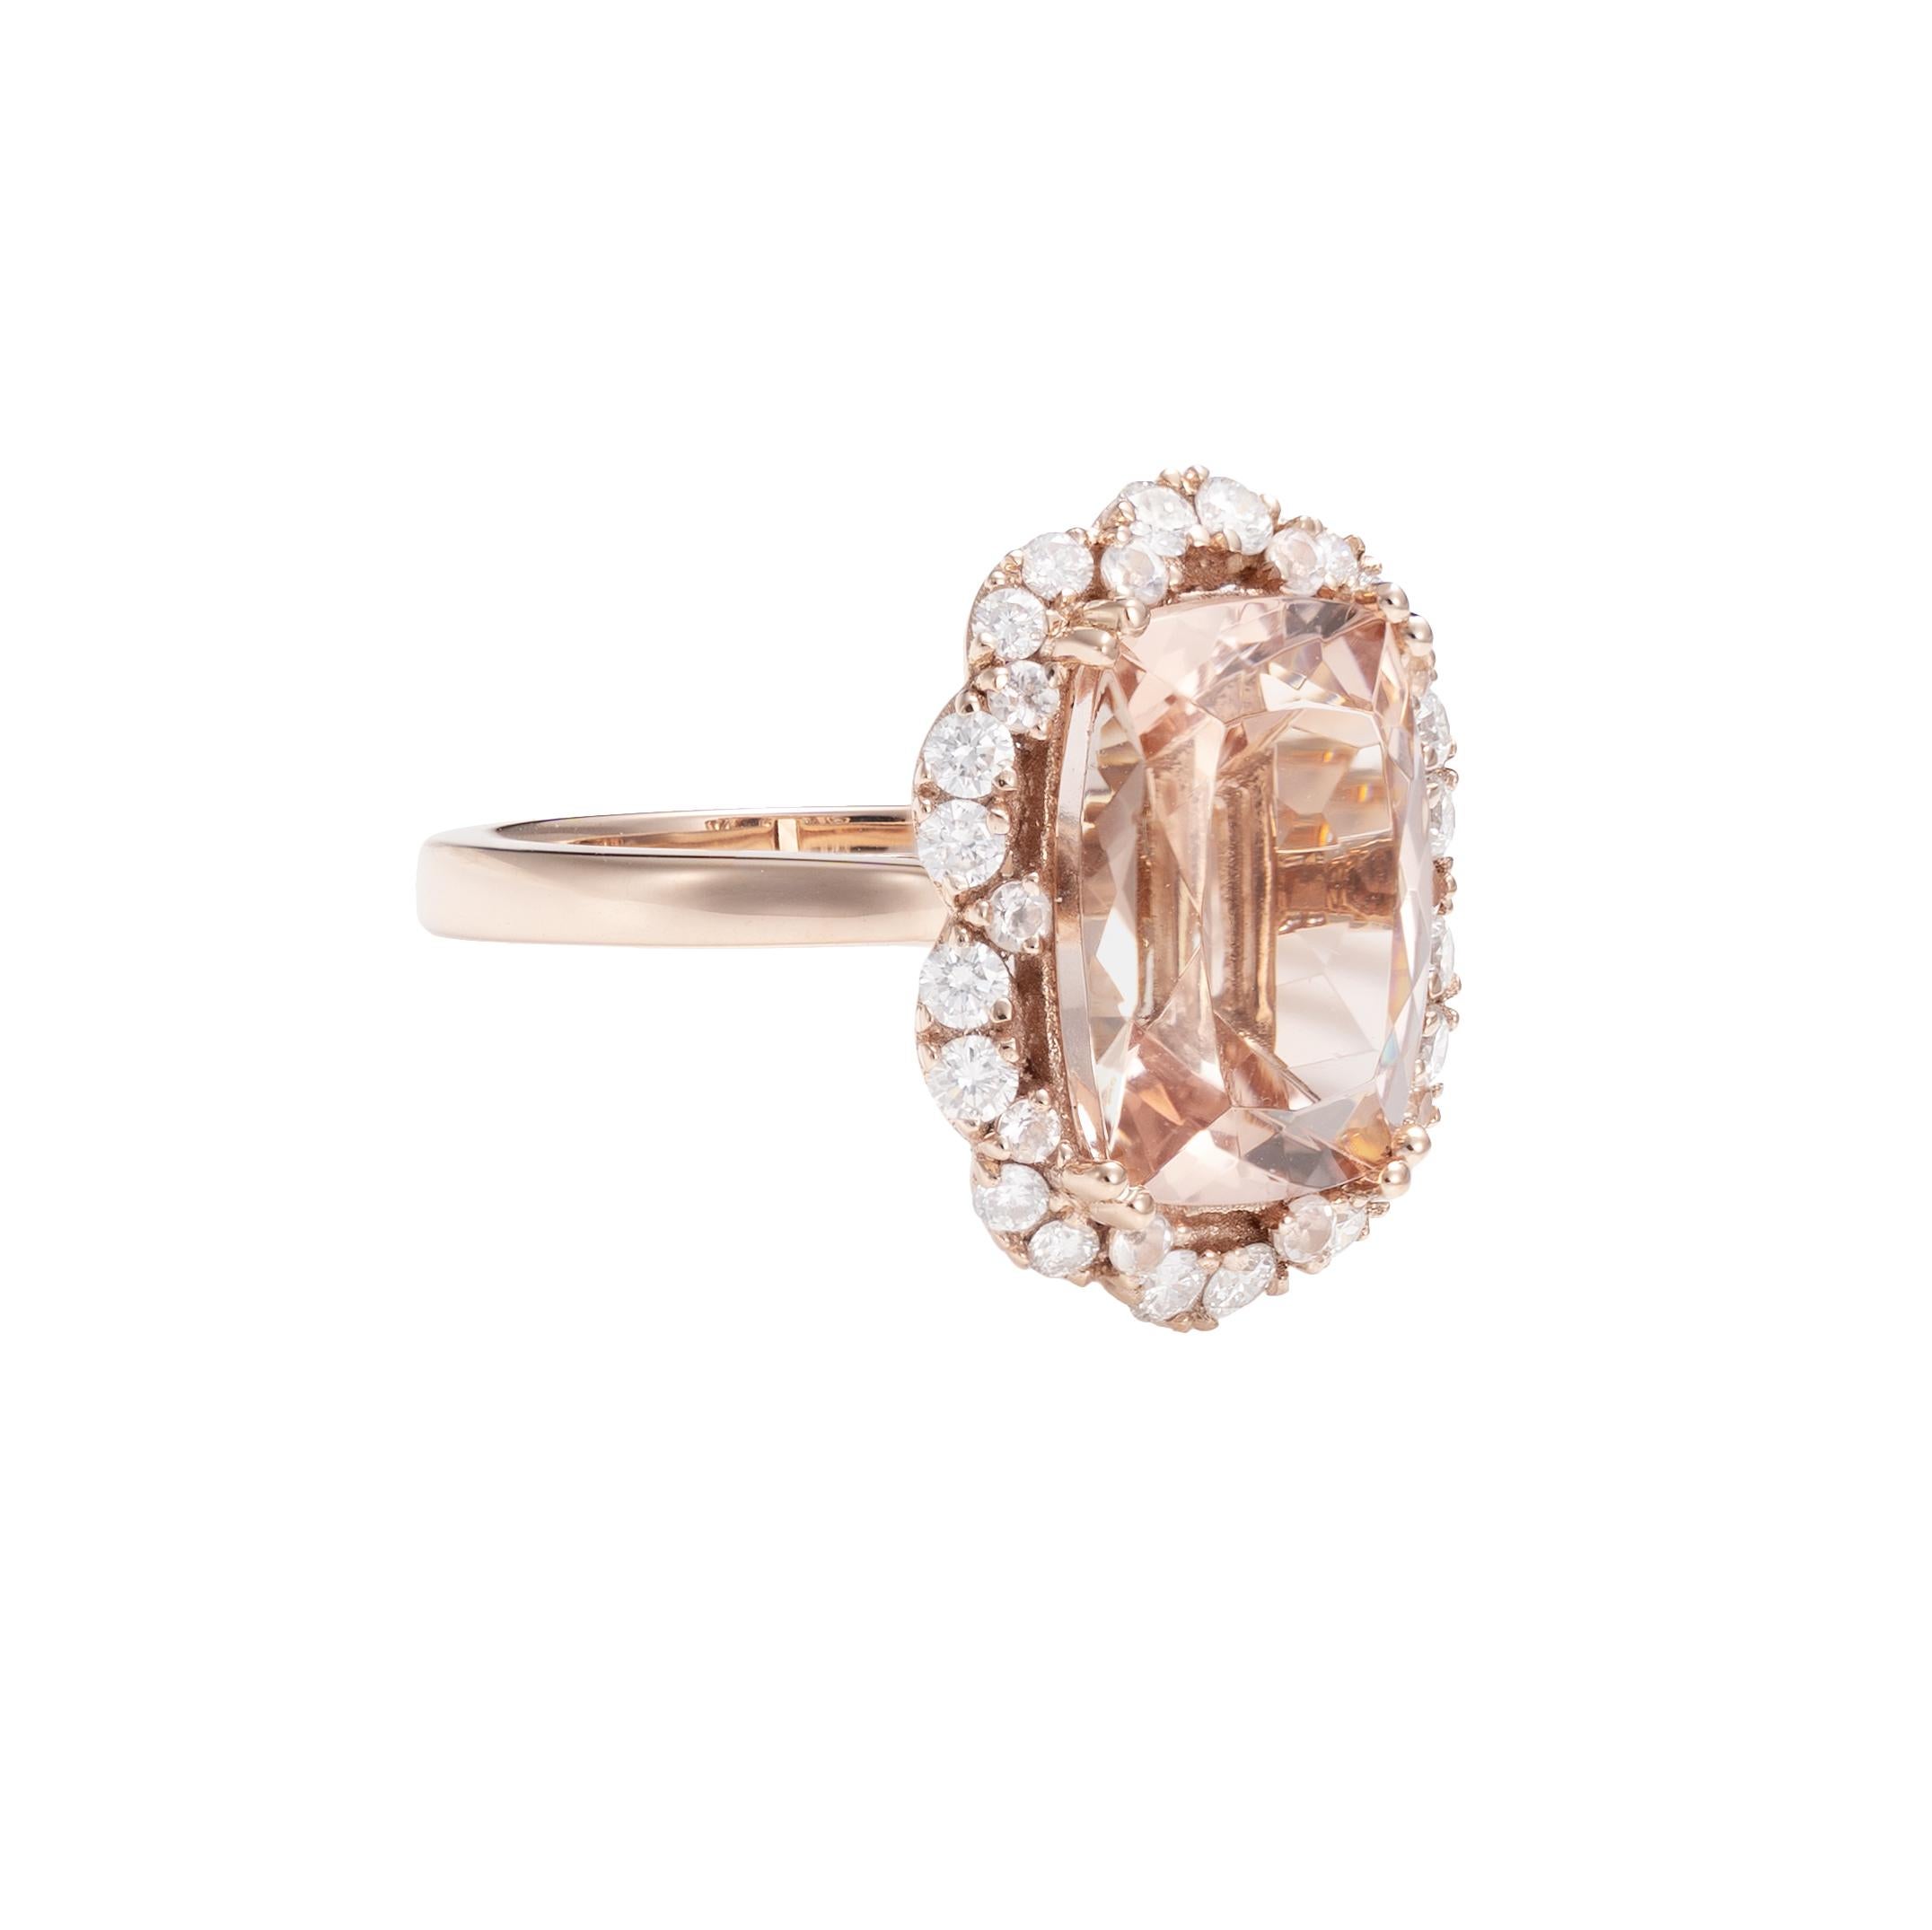 This collection features an array of magnificent morganites! Accented with more morganites and diamonds these rings are made in rose gold and present a classic yet elegant look. 

Classic morganite ring in 18K rose gold with diamonds and morganites.